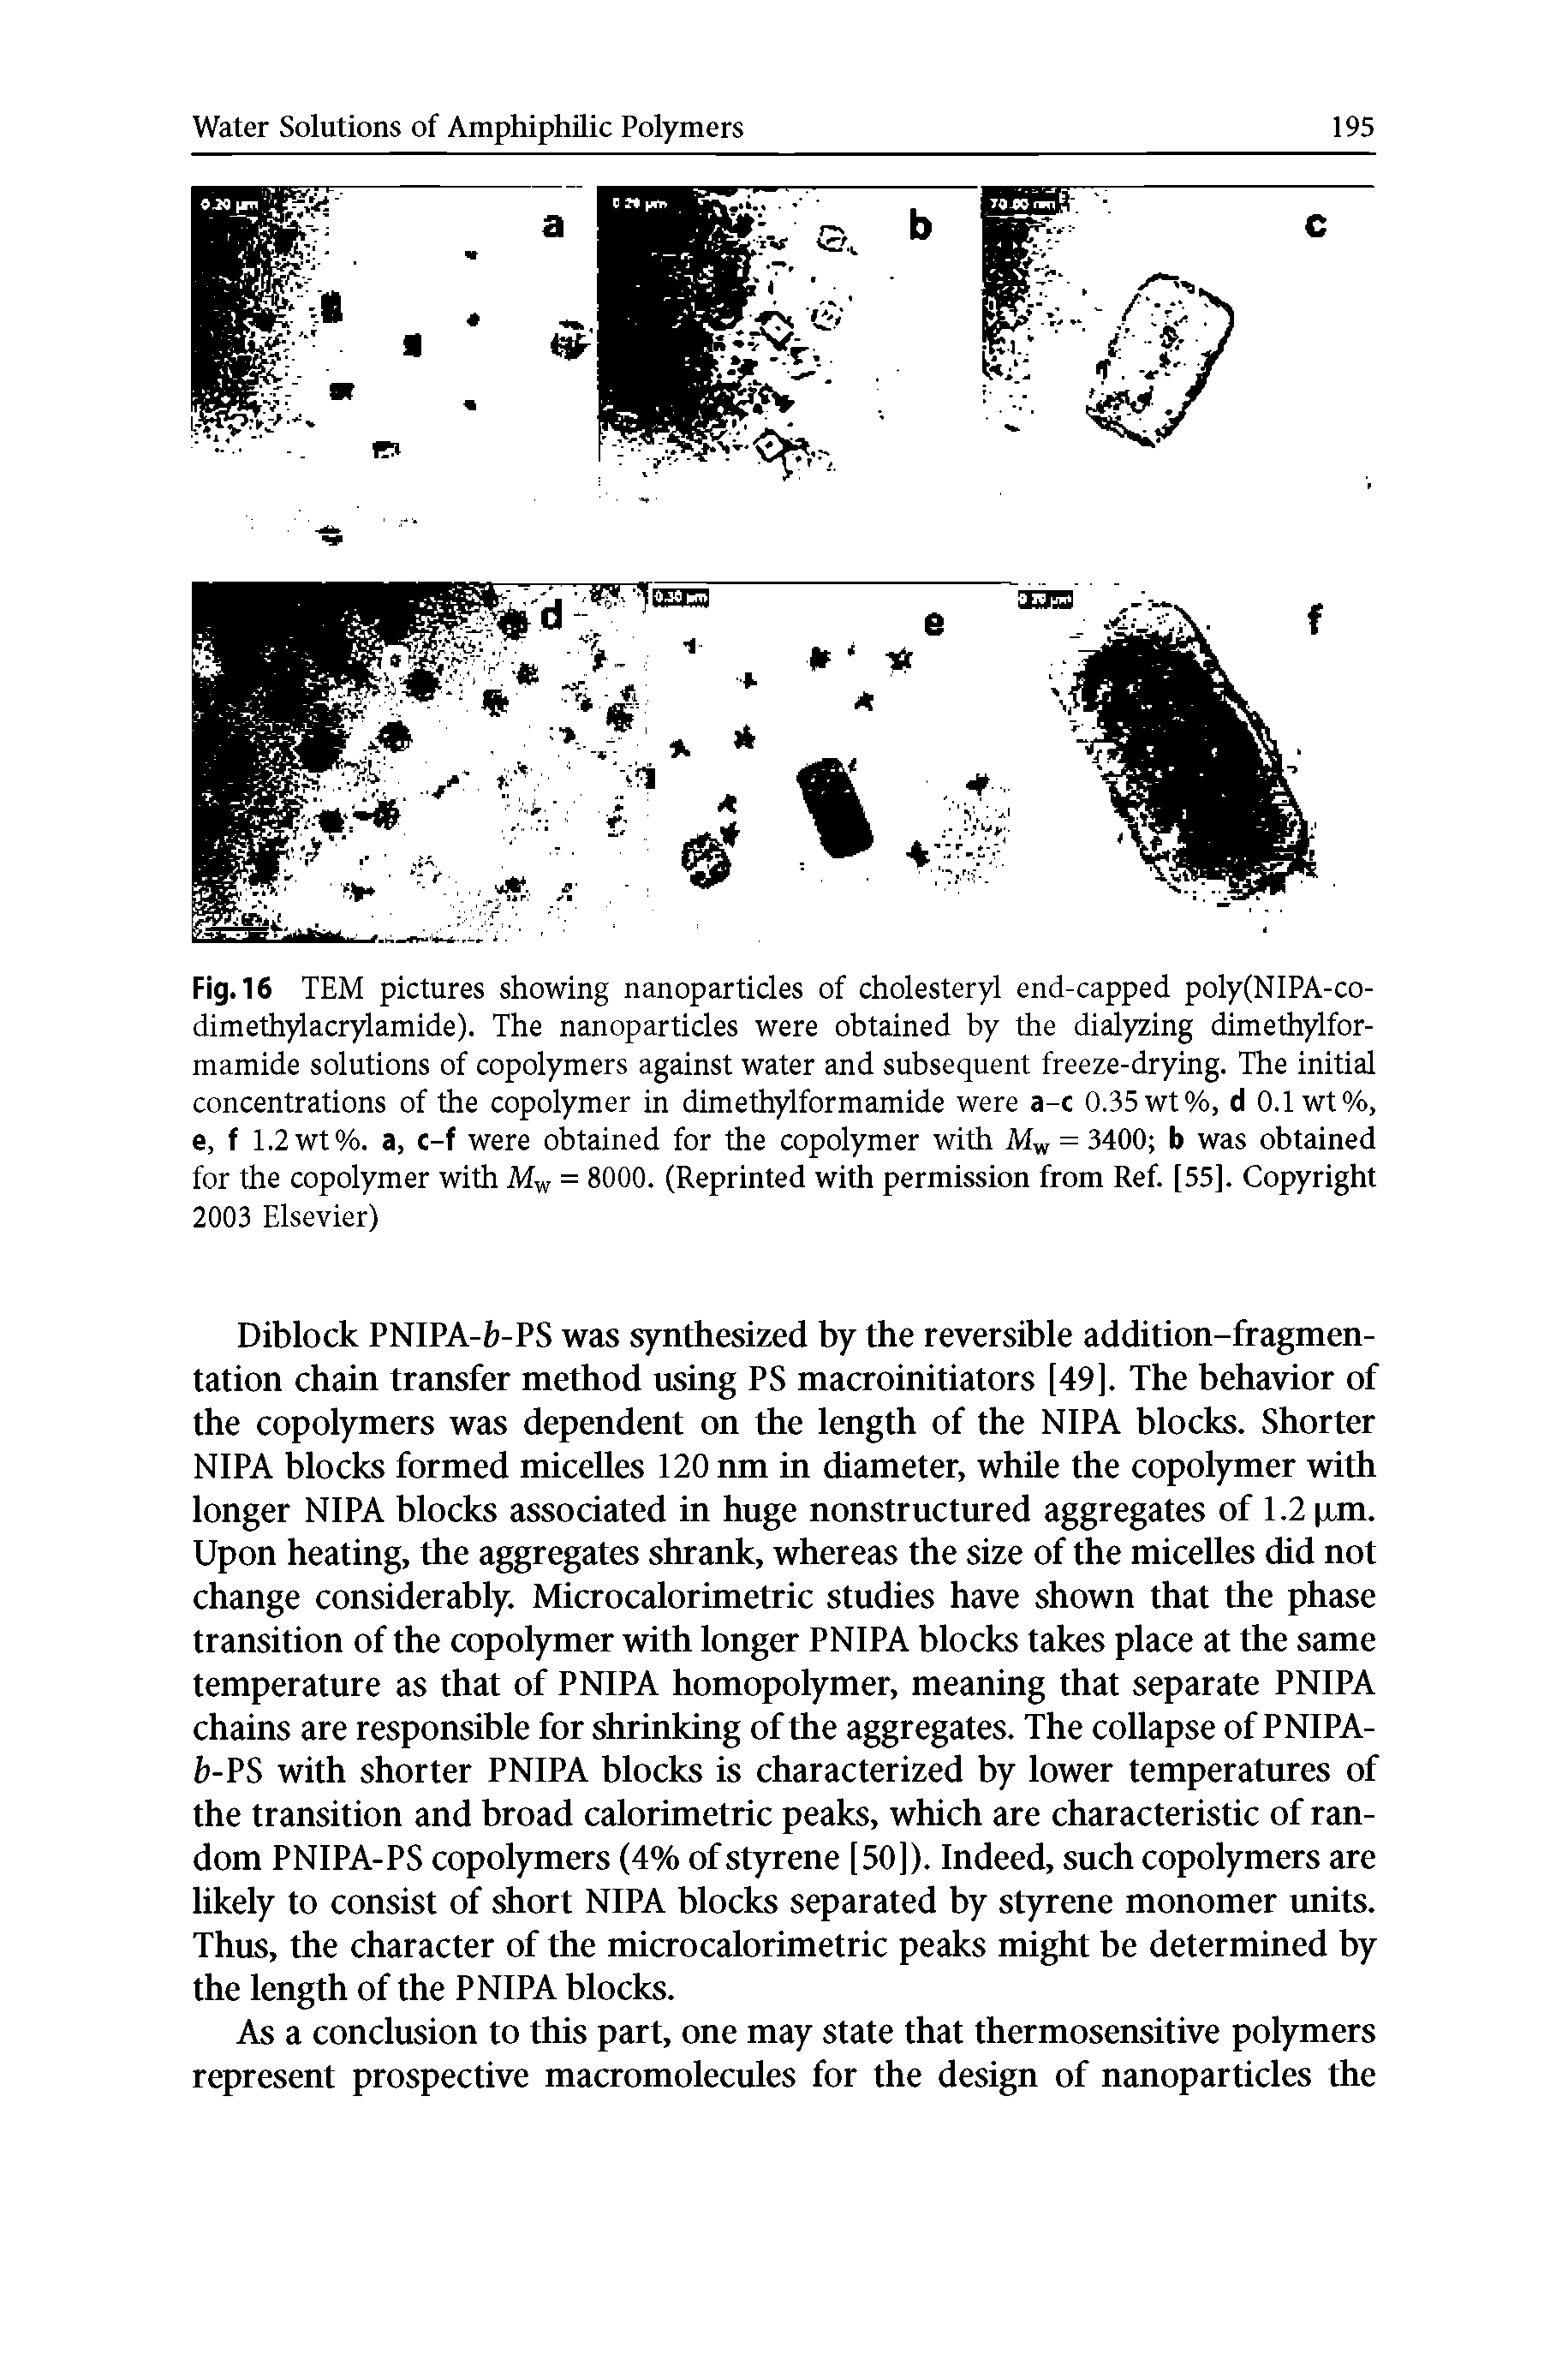 Fig. 16 TEM pictures showing nanoparticles of cholesteryl end-capped poly(NIPA-co-dimethylacrylamide). The nanoparticles were obtained by the dialyzing dimethylfor-mamide solutions of copolymers against water and subsequent freeze-drying. The initial concentrations of the copolymer in dimethylformamide were a-c 0.35 wt%, d 0.1 wt%, e, f 1.2 wt%. a, c-f were obtained for the copolymer with Mw = 3400 b was obtained for the copolymer with Mw = 8000. (Reprinted with permission from Ref. [55]. Copyright 2003 Elsevier)...